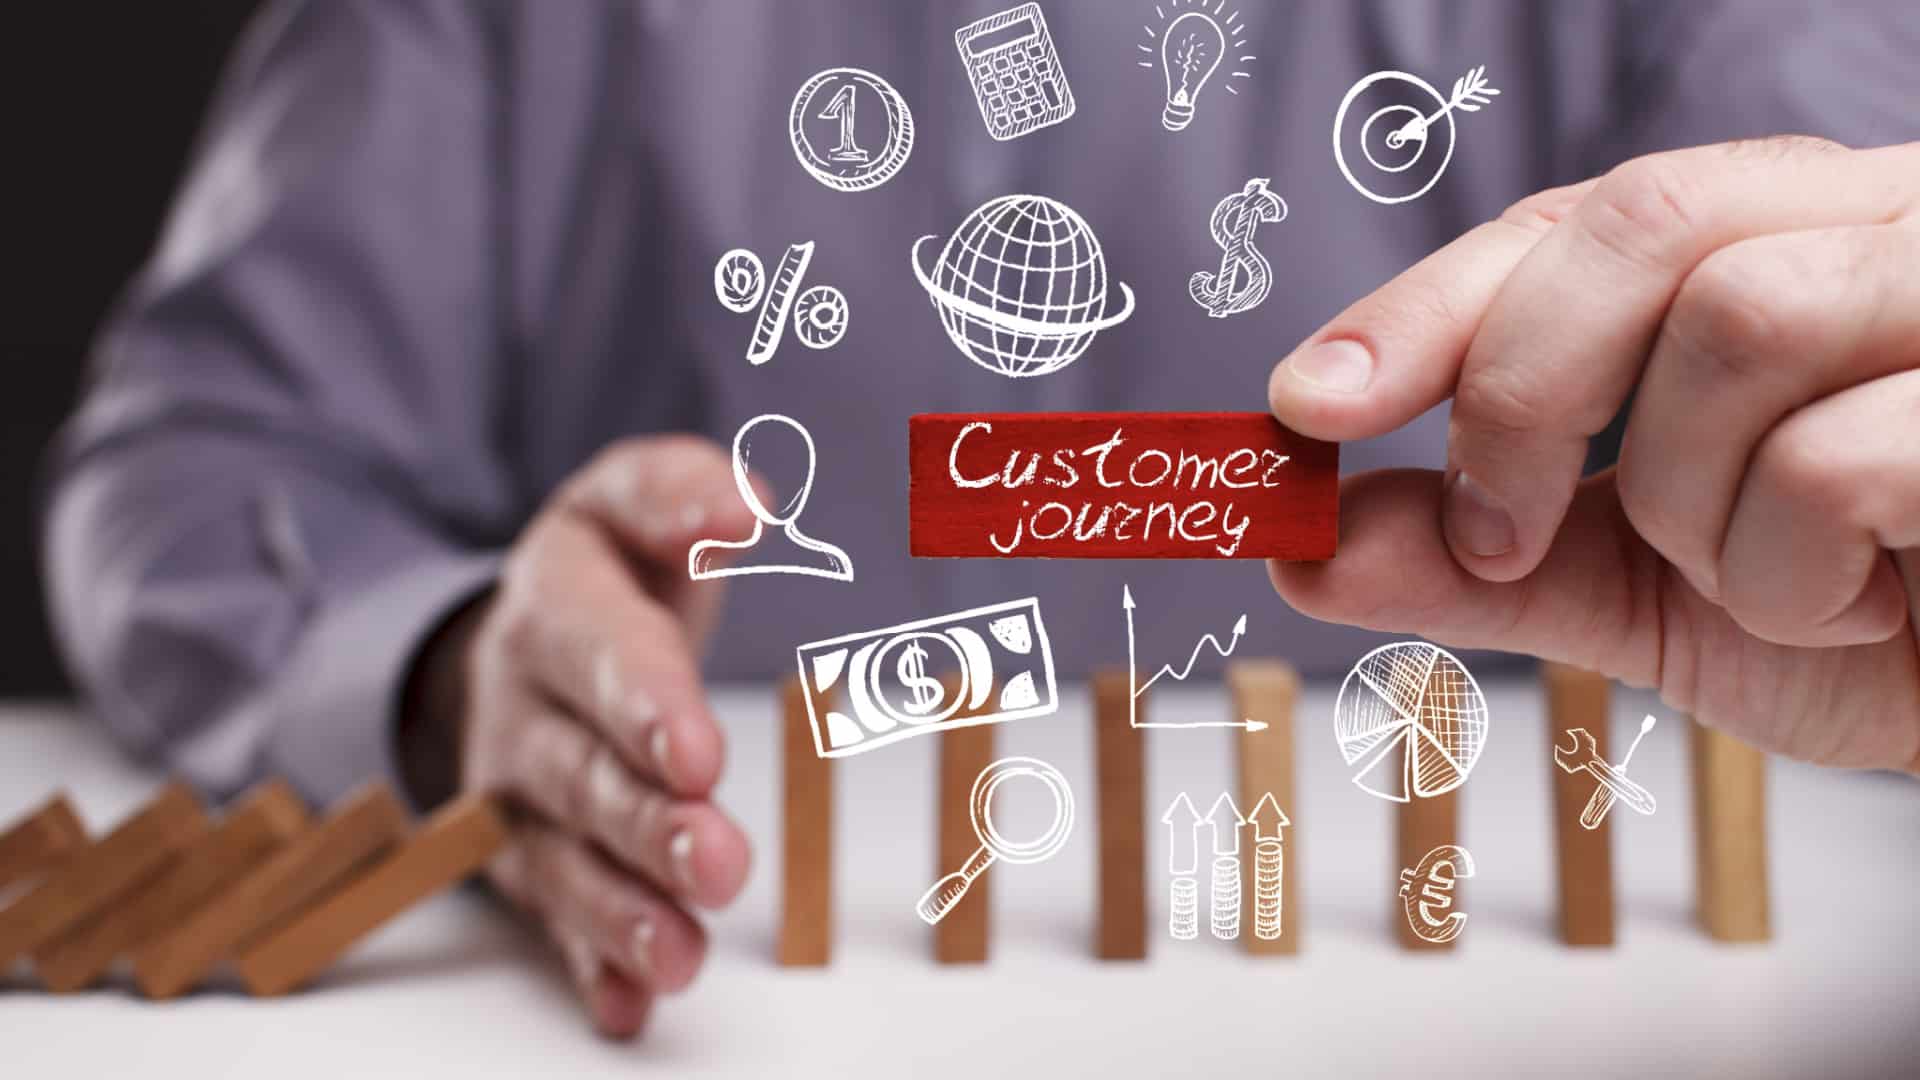 How customer journey orchestration affects process: Getting started on CJO thumbnail